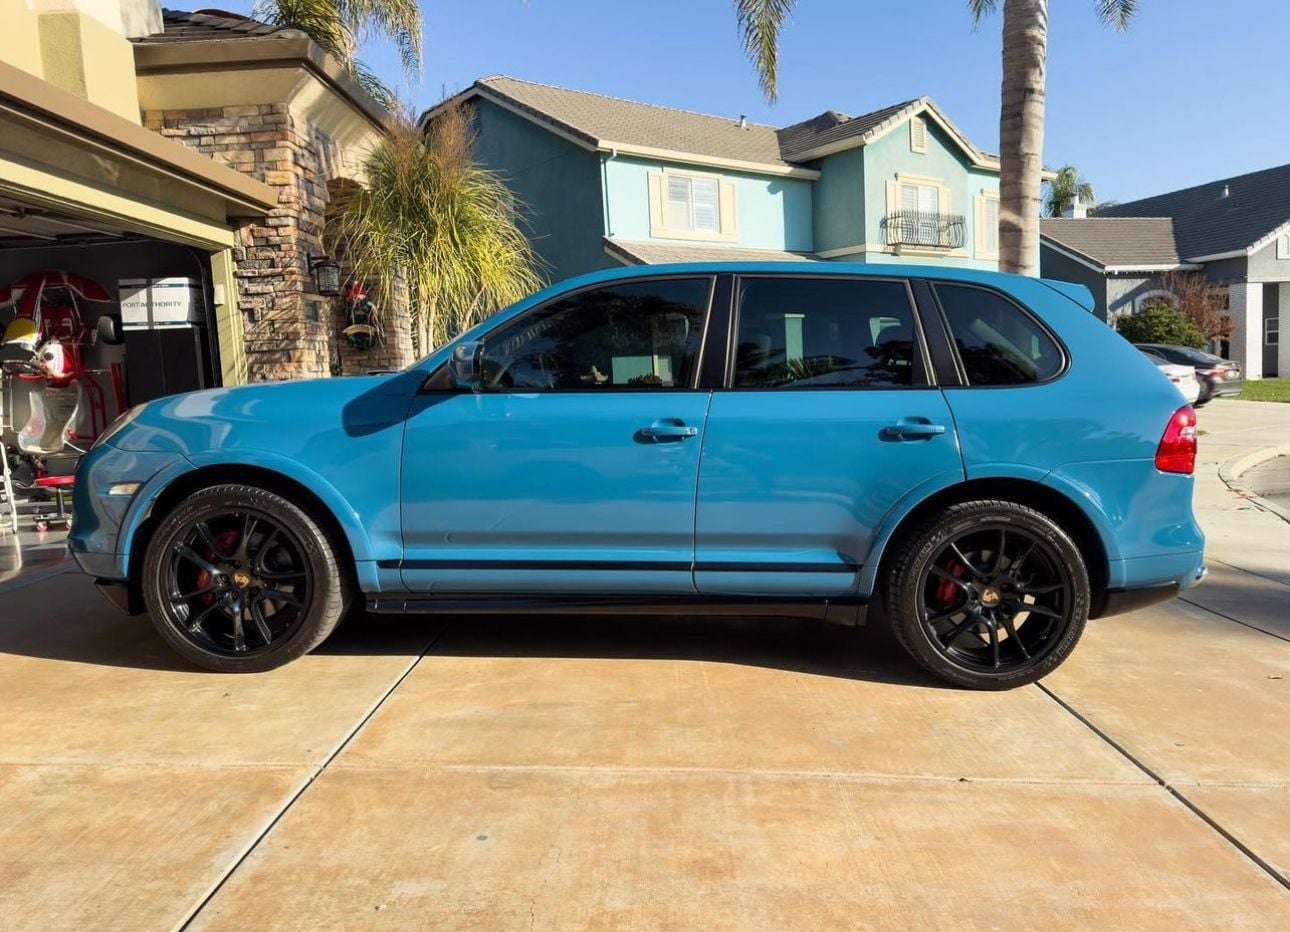 2010 Porsche Cayenne - 2010 Porsche Cayenne GTS Wrapped in Oslo Blue - Used - VIN WP1AD2AP8ALA61403 - 103,000 Miles - AWD - Automatic - SUV - Blue - Los Banos, CA 93635, United States